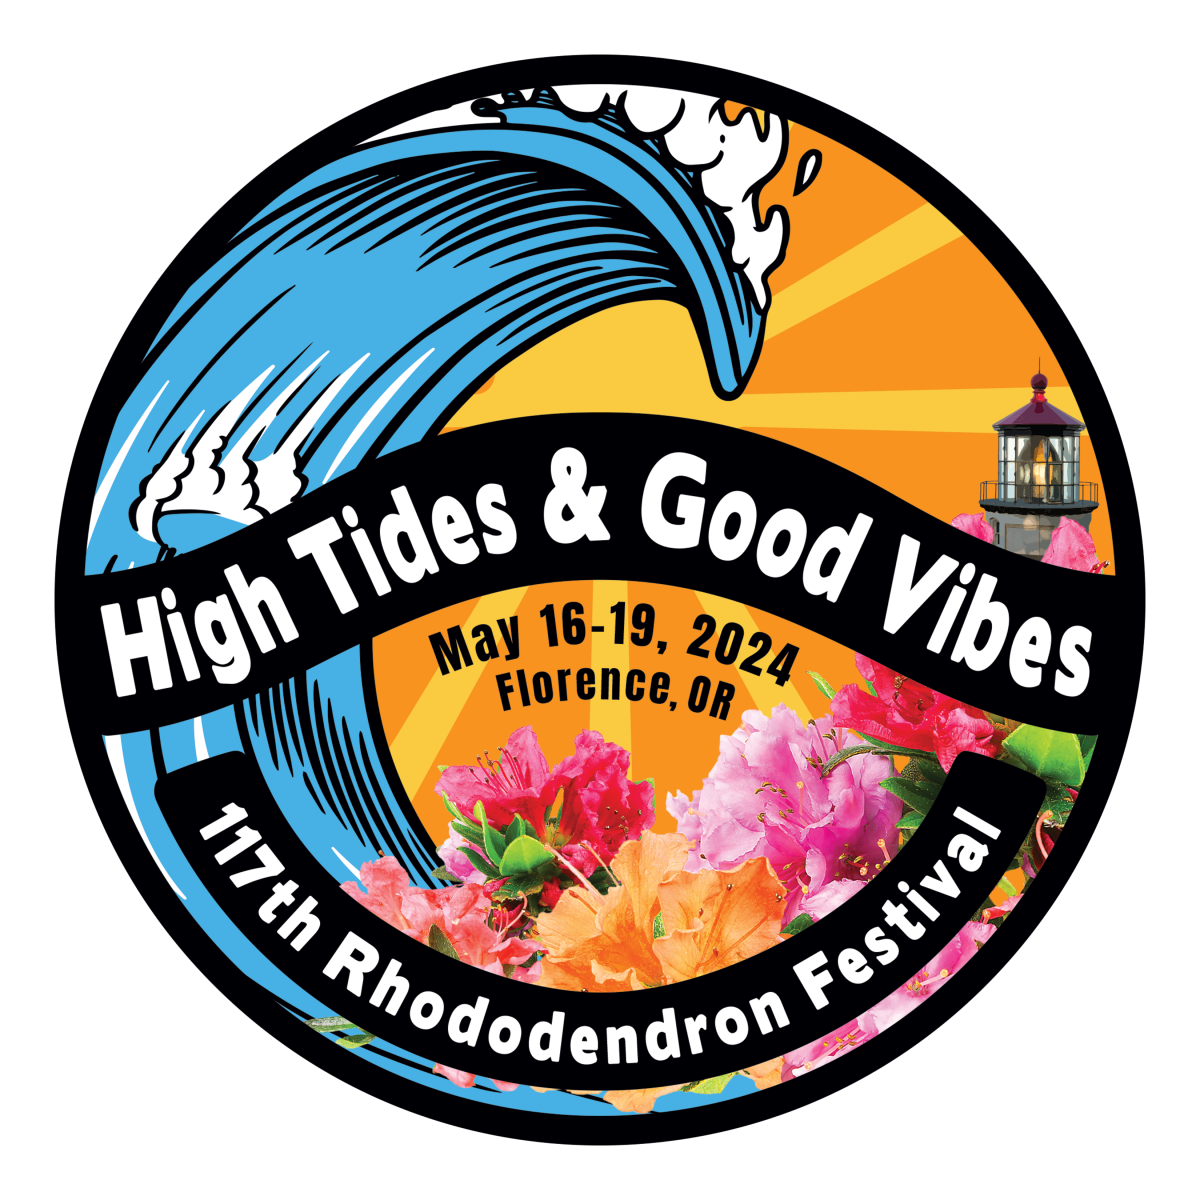 117th Annual Rhododendron Festival "Rhody Days" Florence, OR